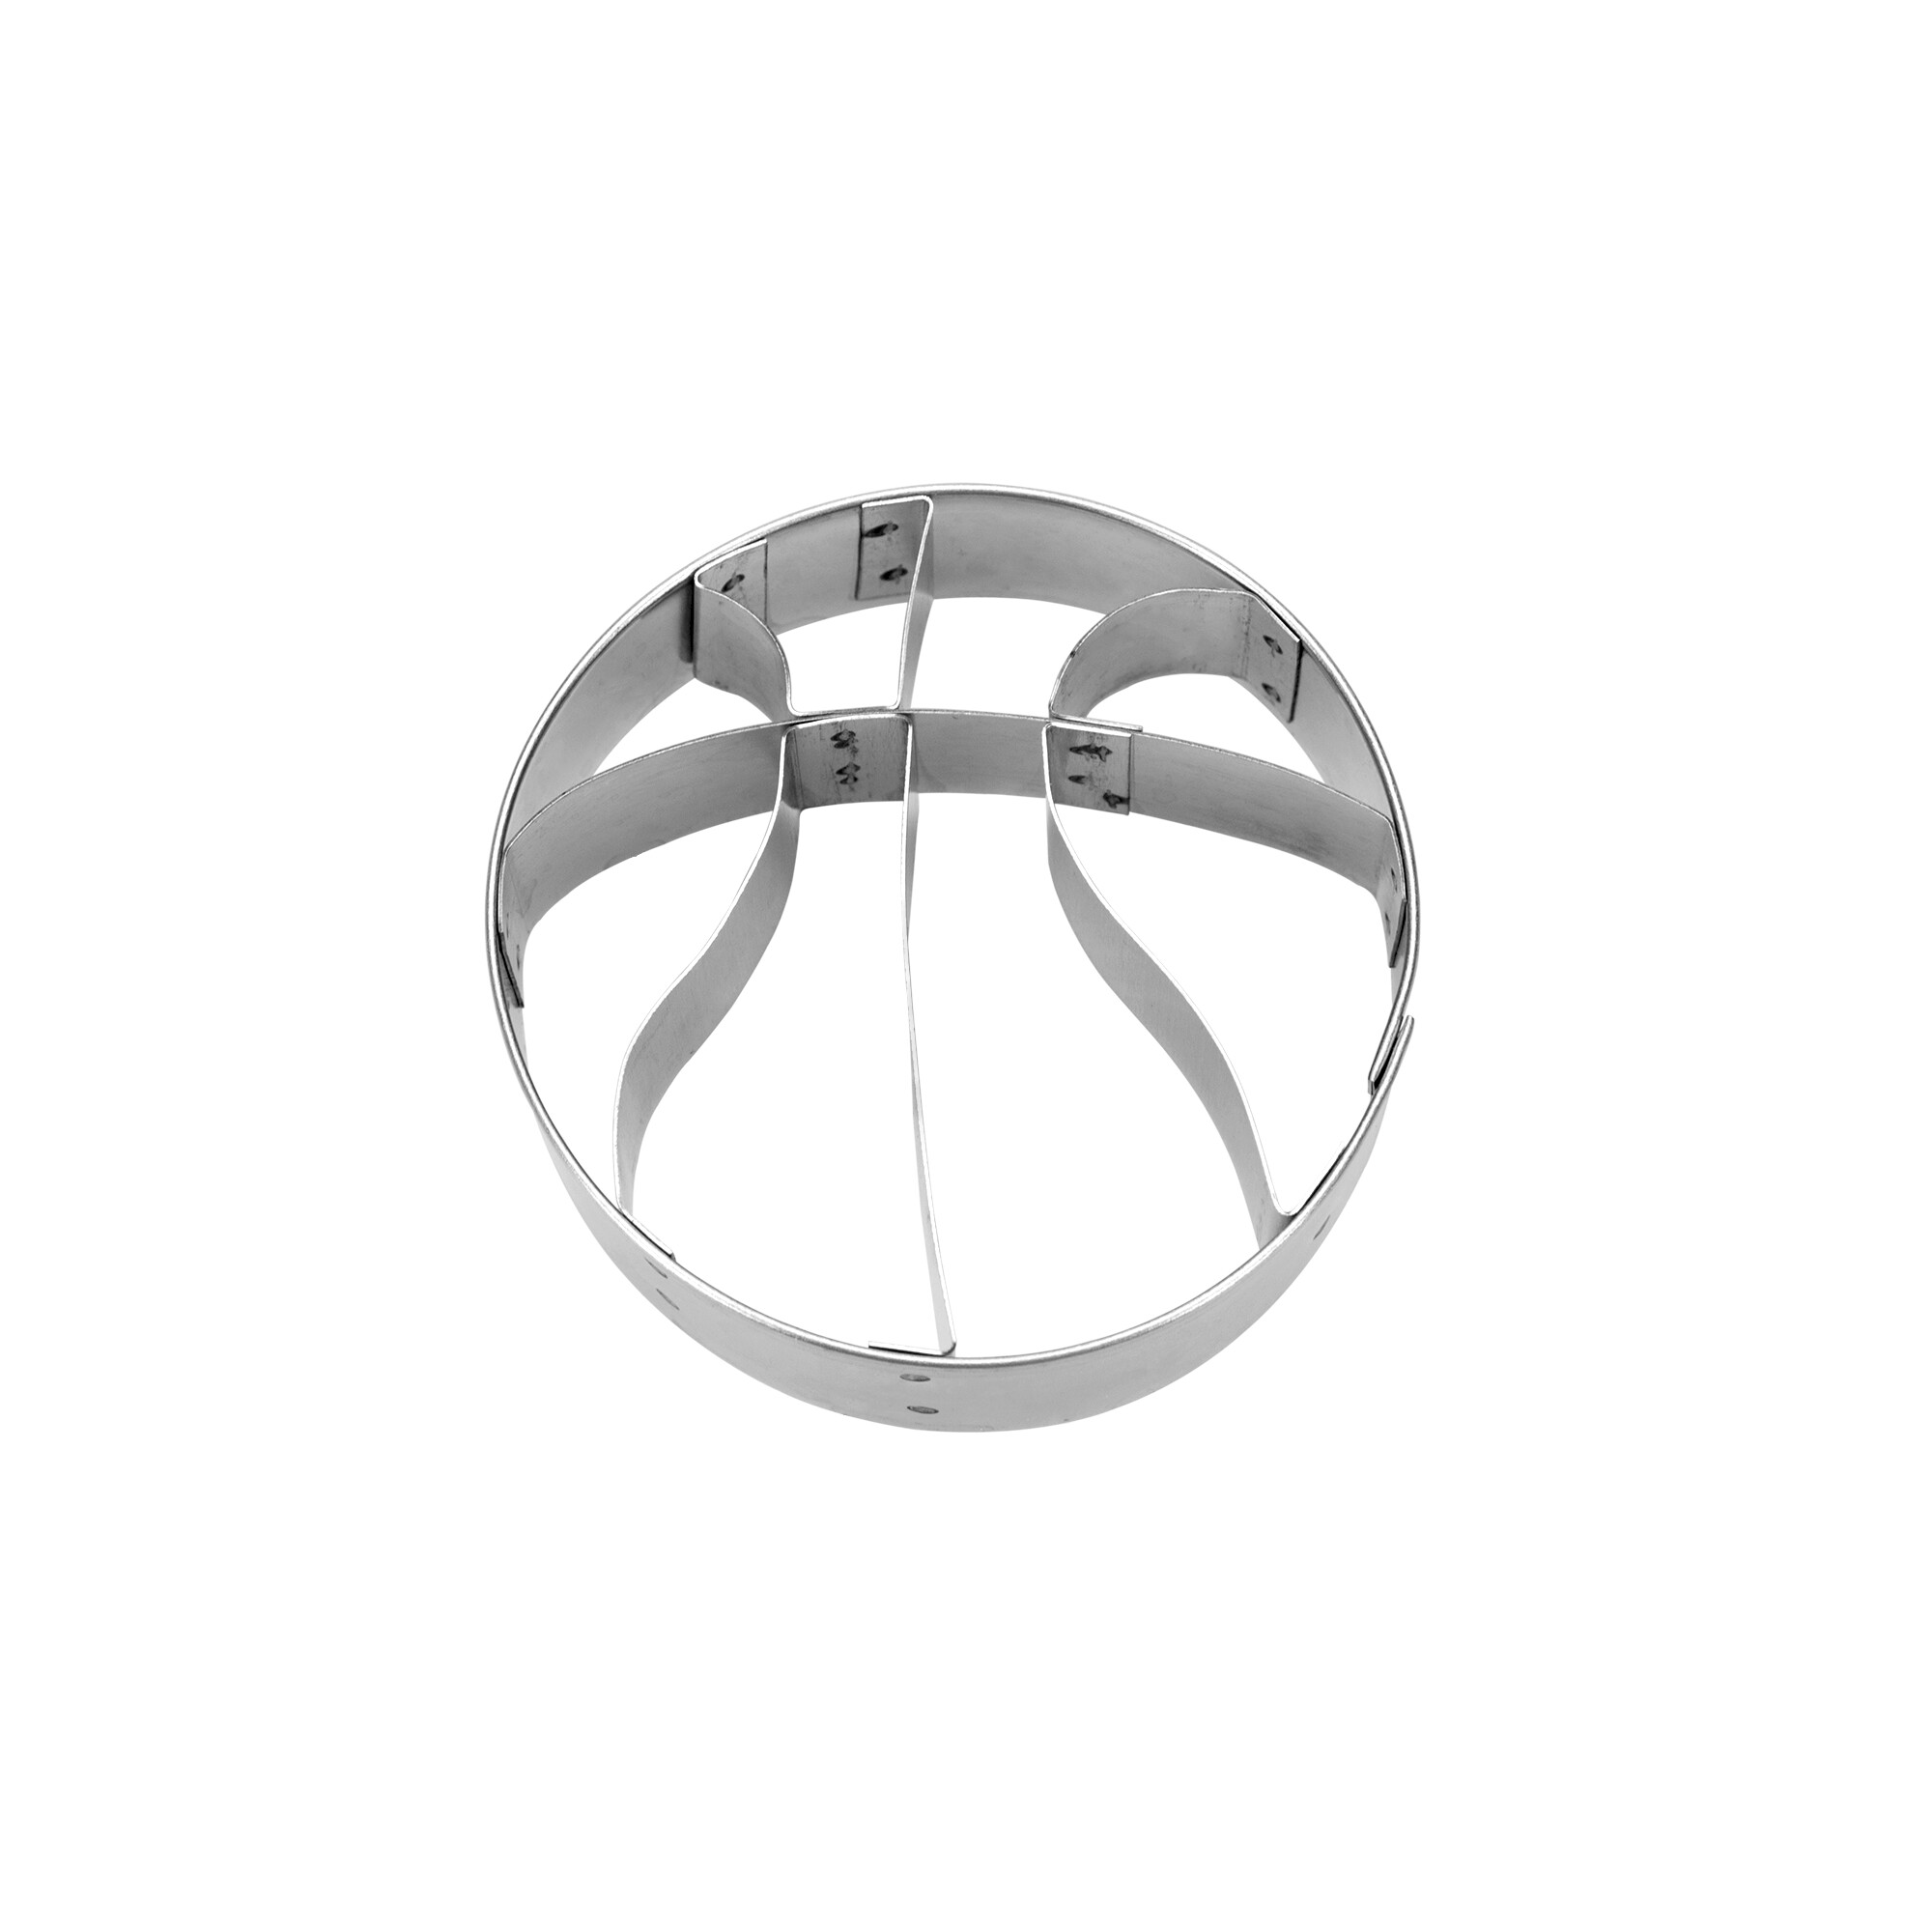 Cookie cutter with stamp – Basket ball